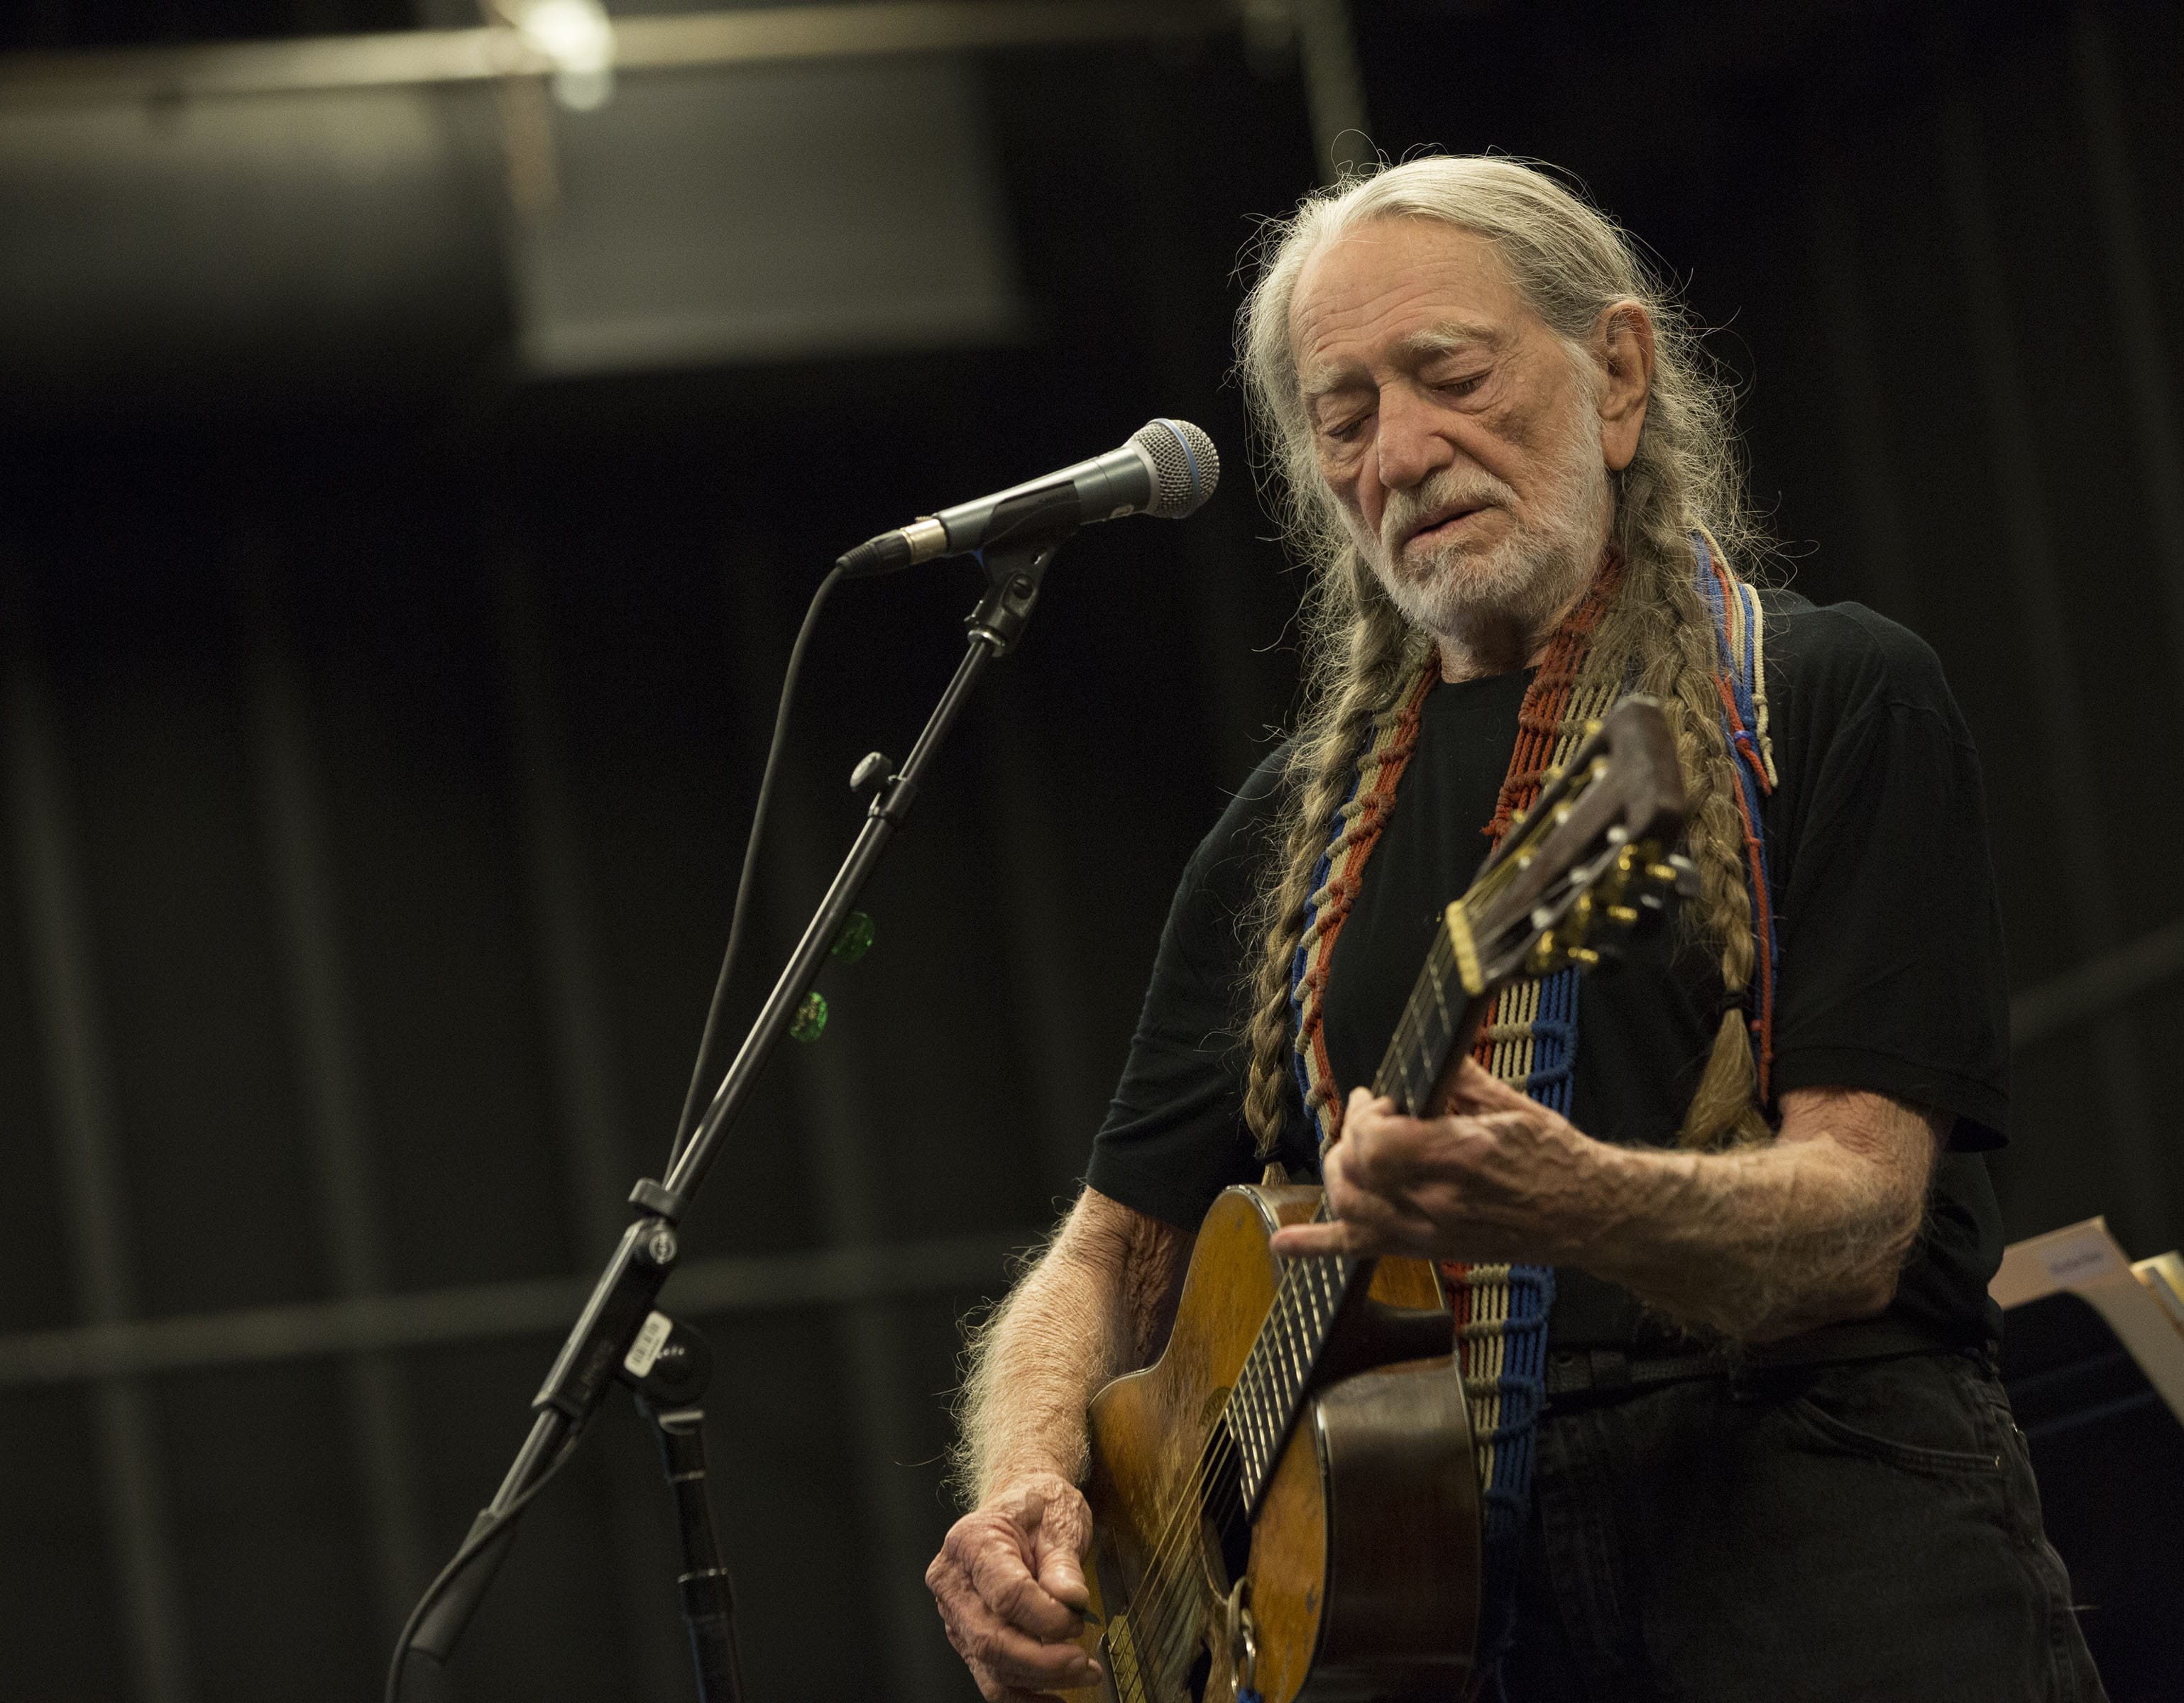 Watch Willie Nelson’s New Video for “Me and You”